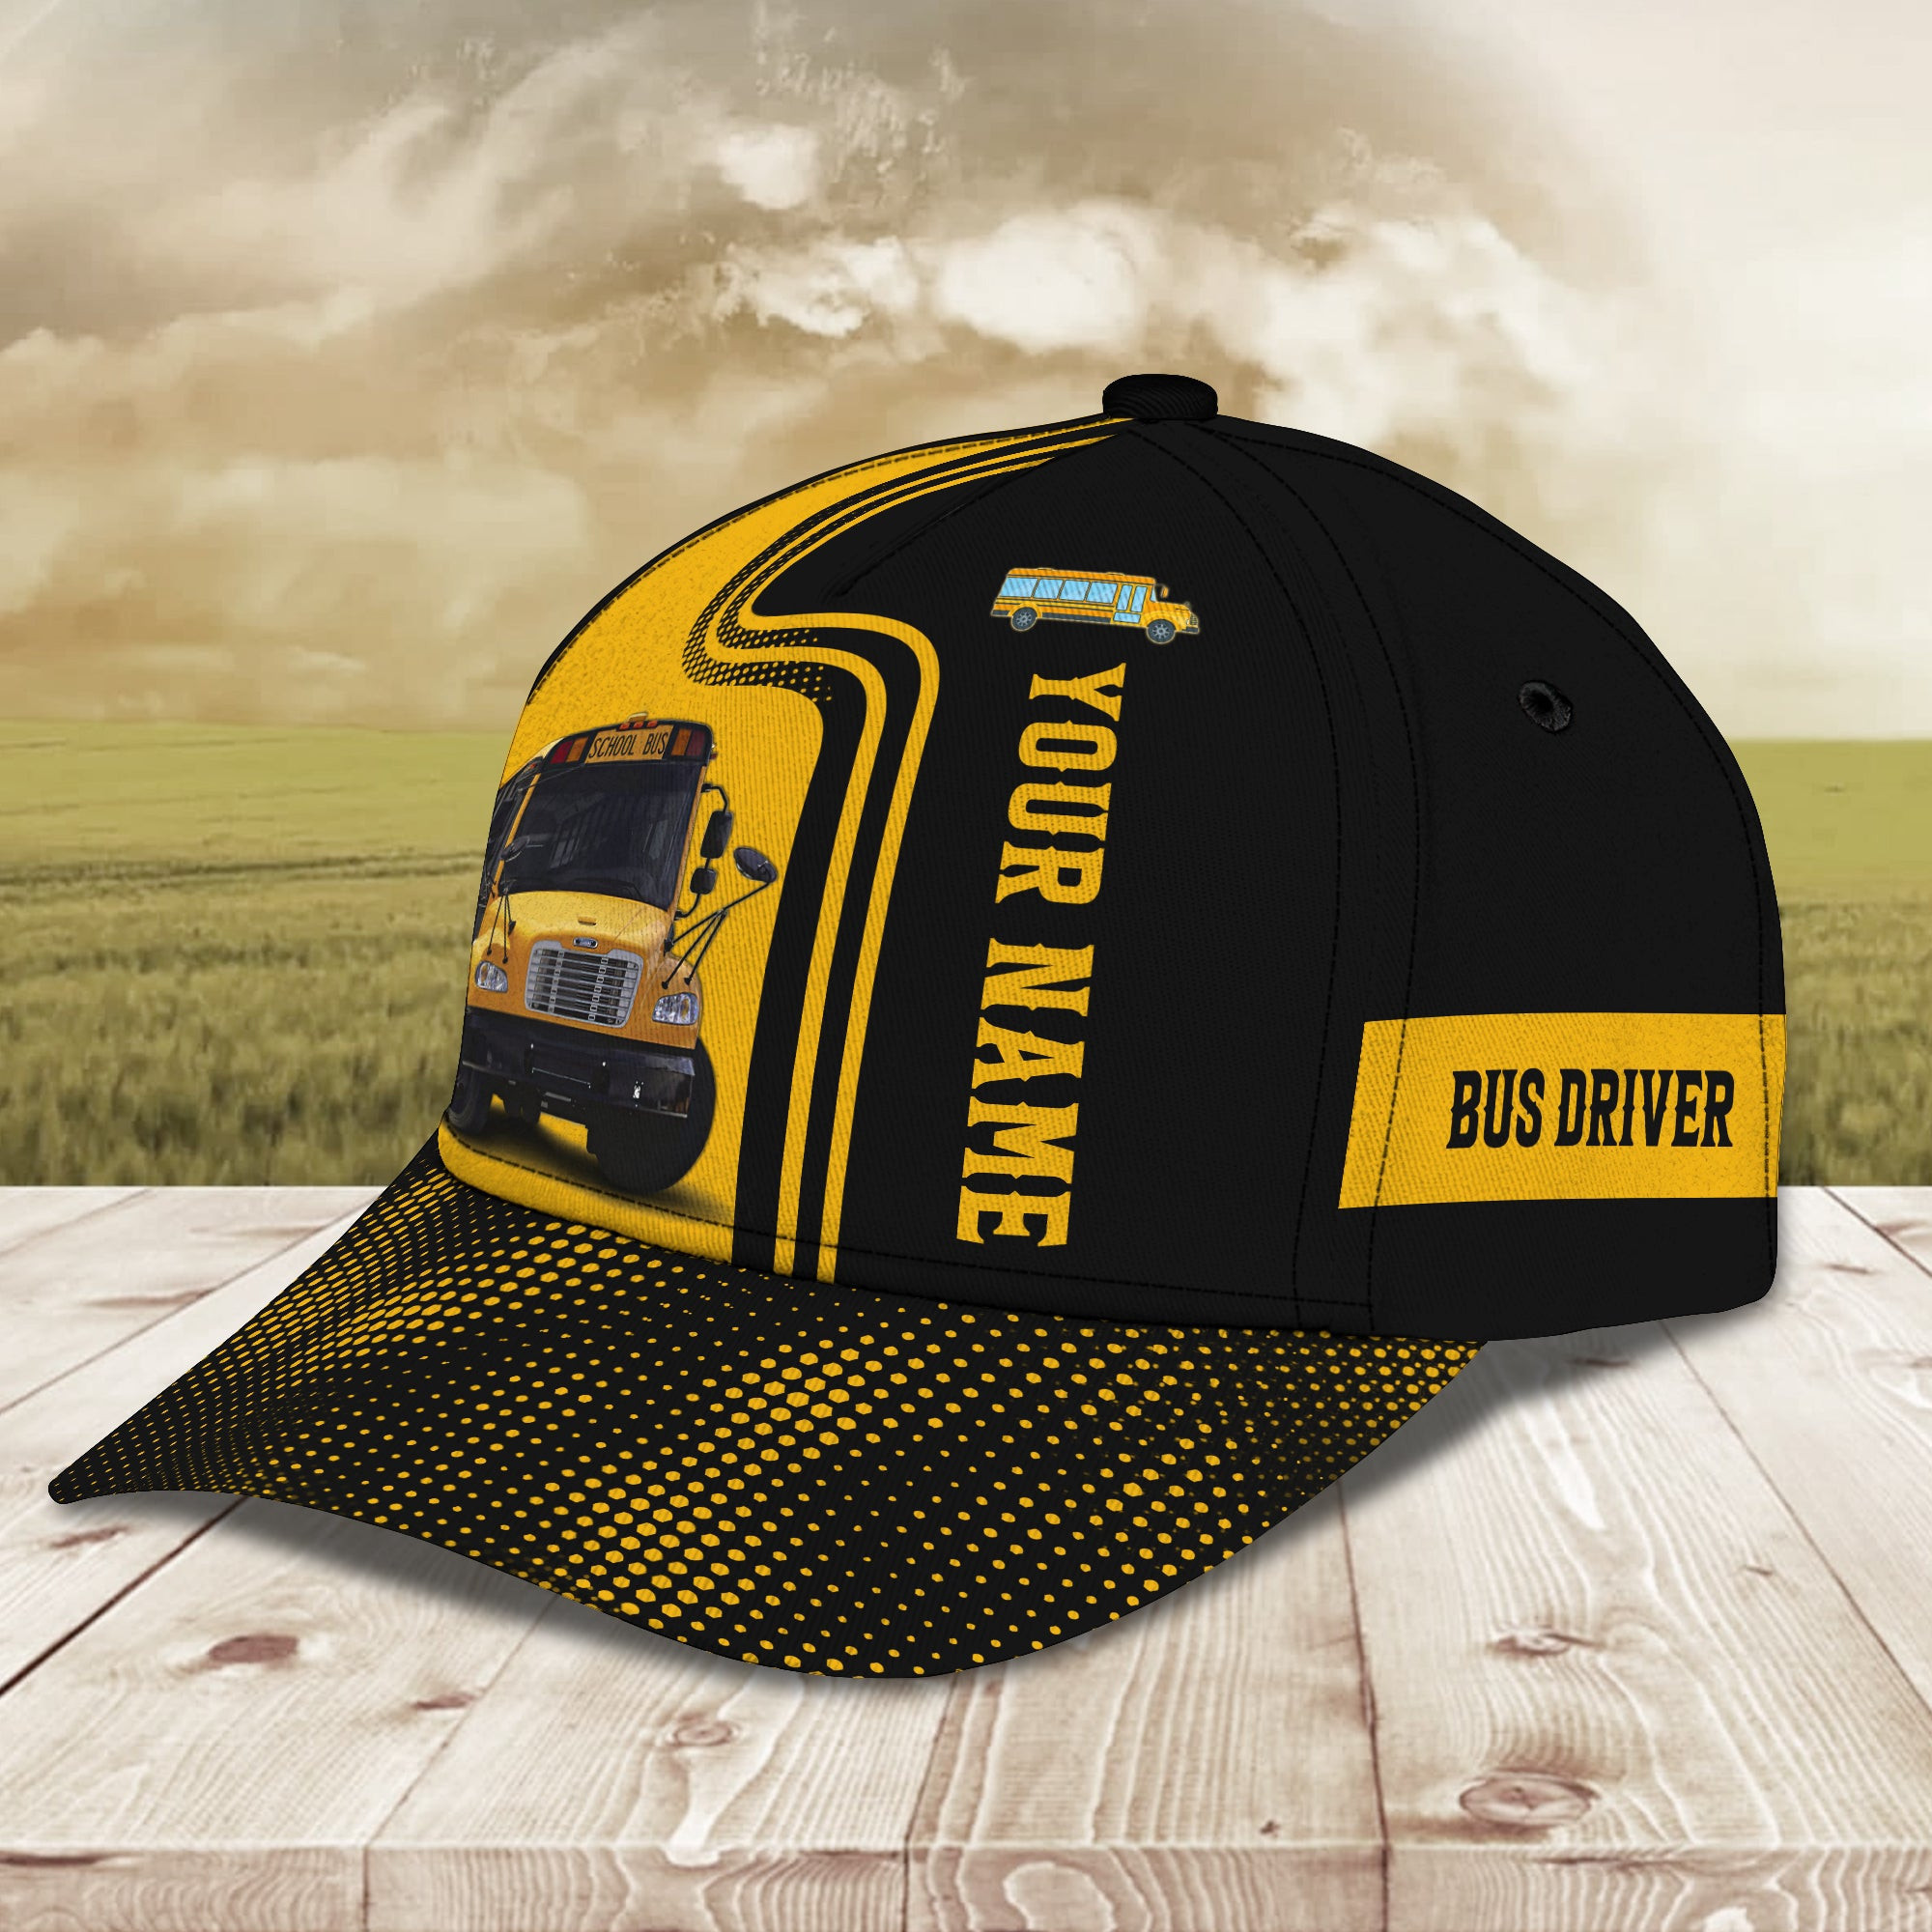 BUS DRIVER - Personalized Name Cap 01 - TD96